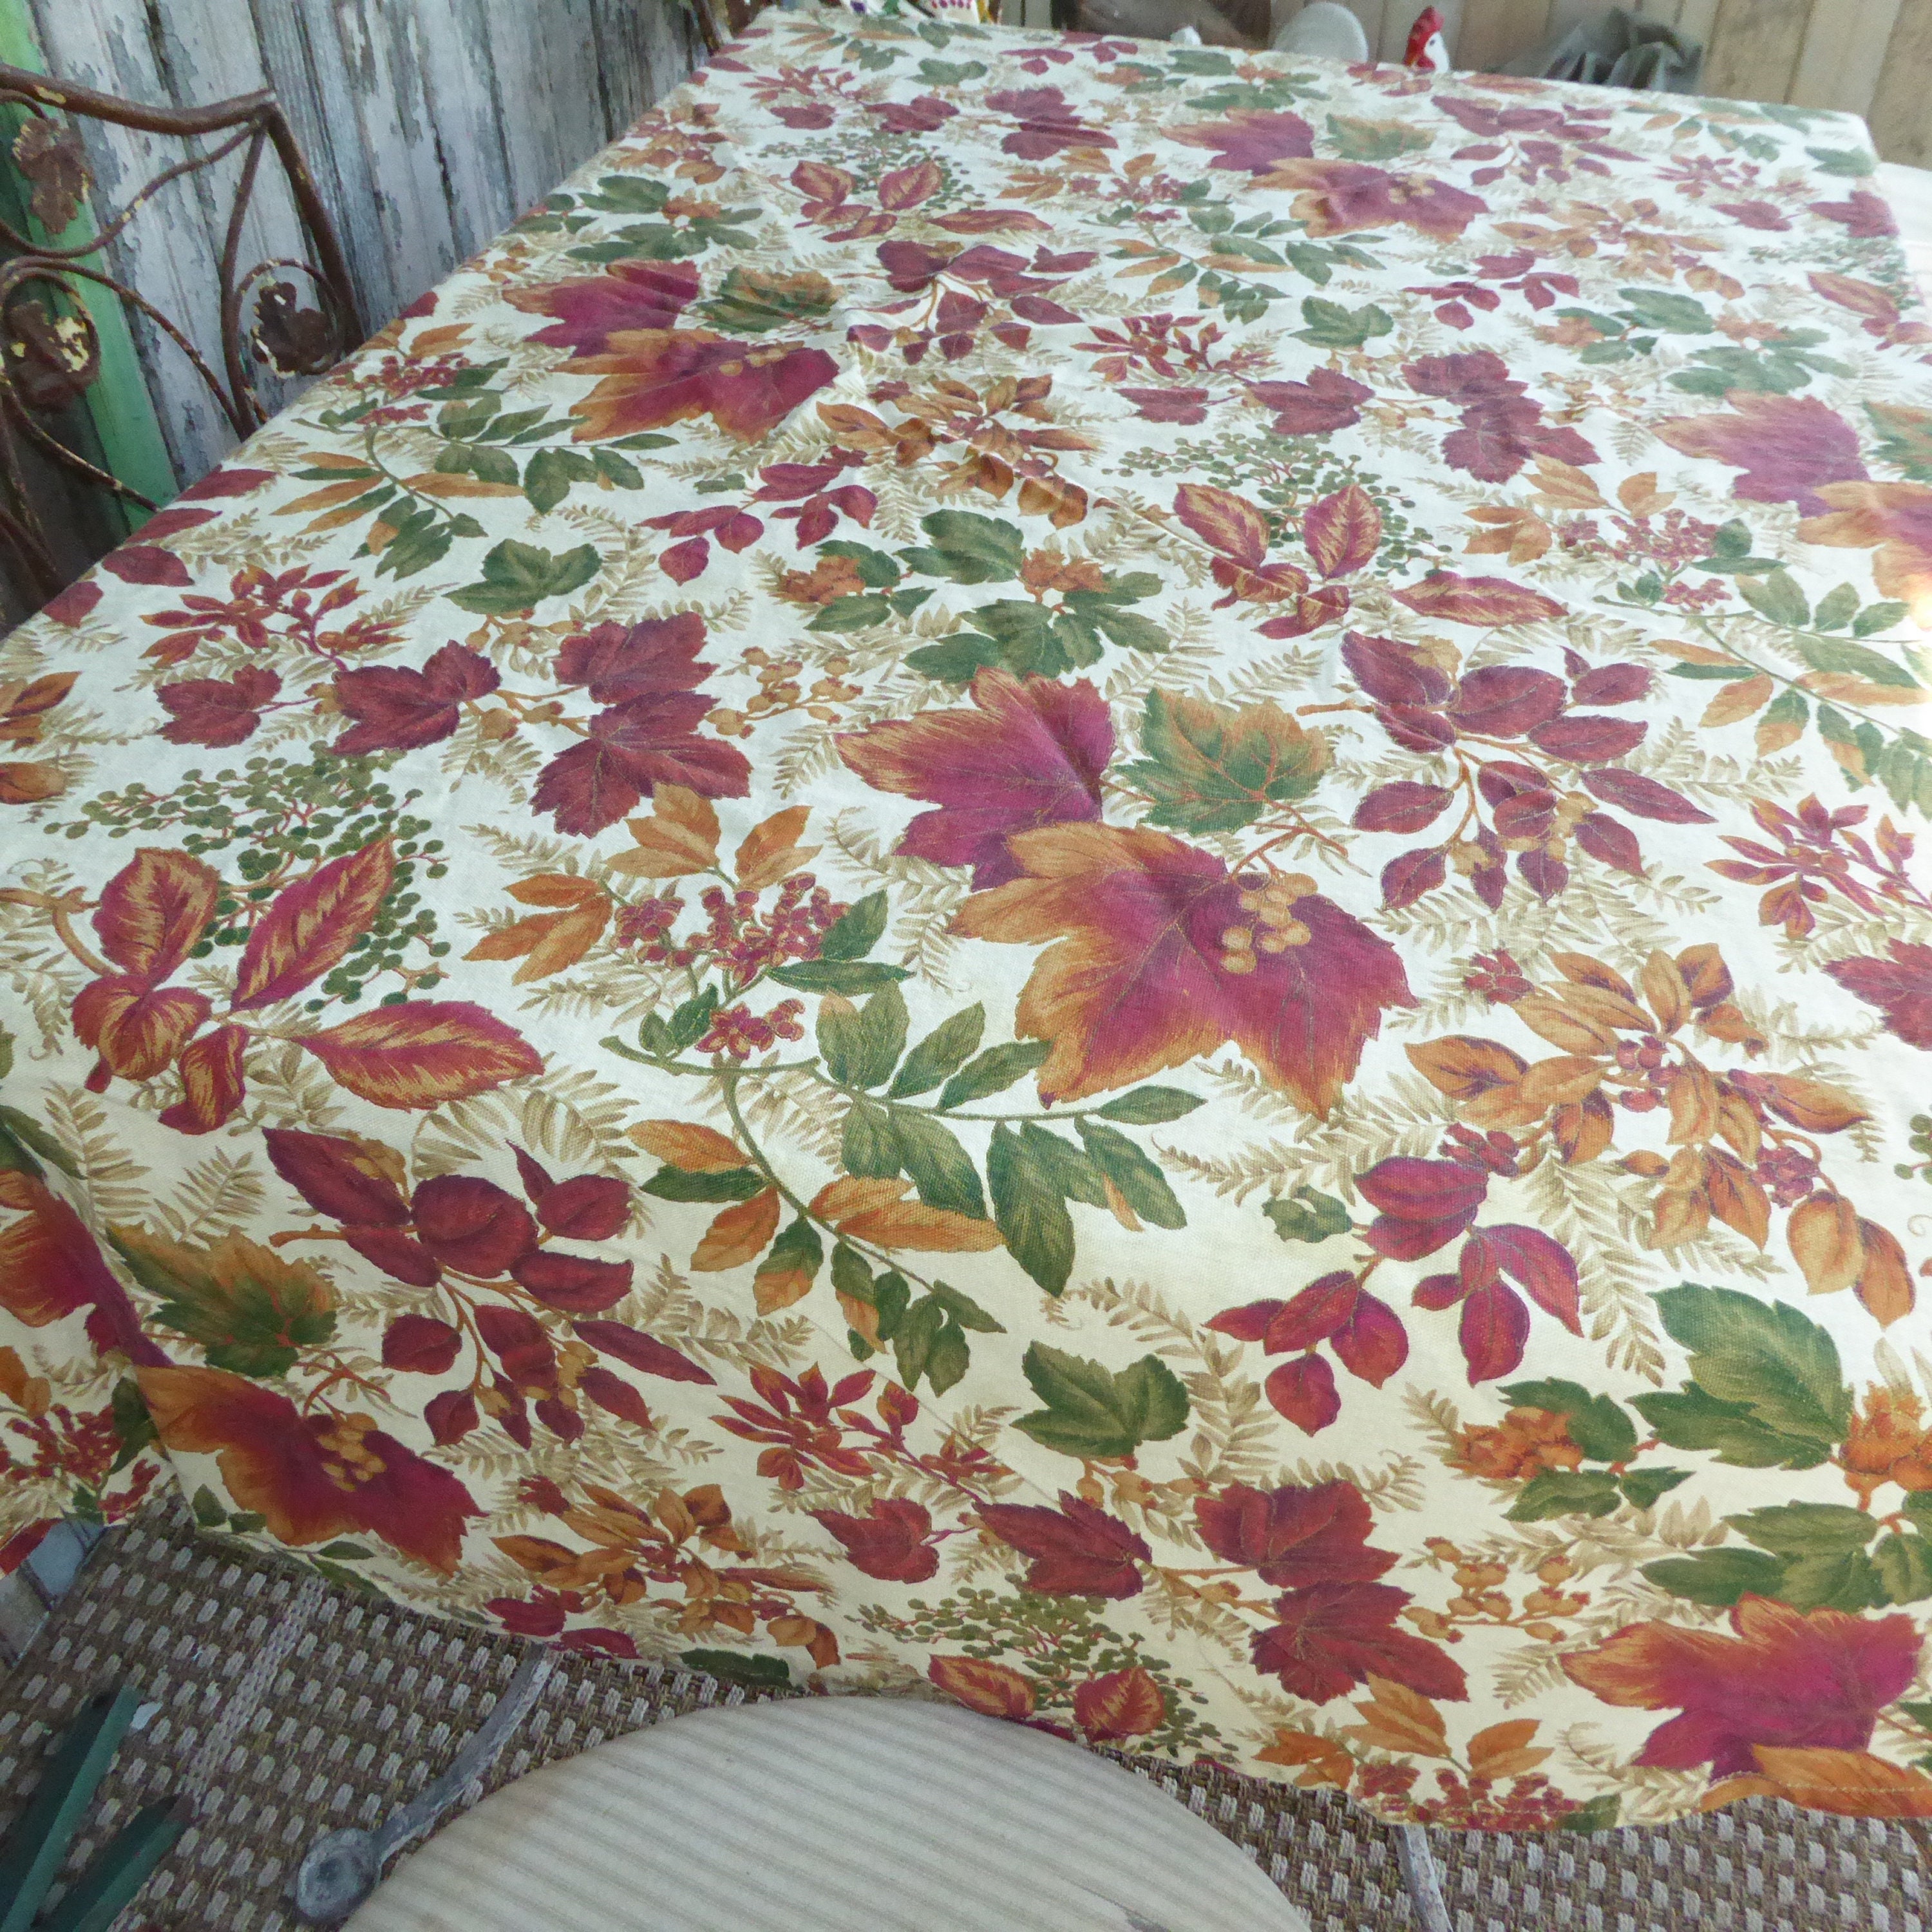 Vintage Cotton Blend Round Fall Tablecloth Beige Background with Large Mixed Leaves & Berries 60